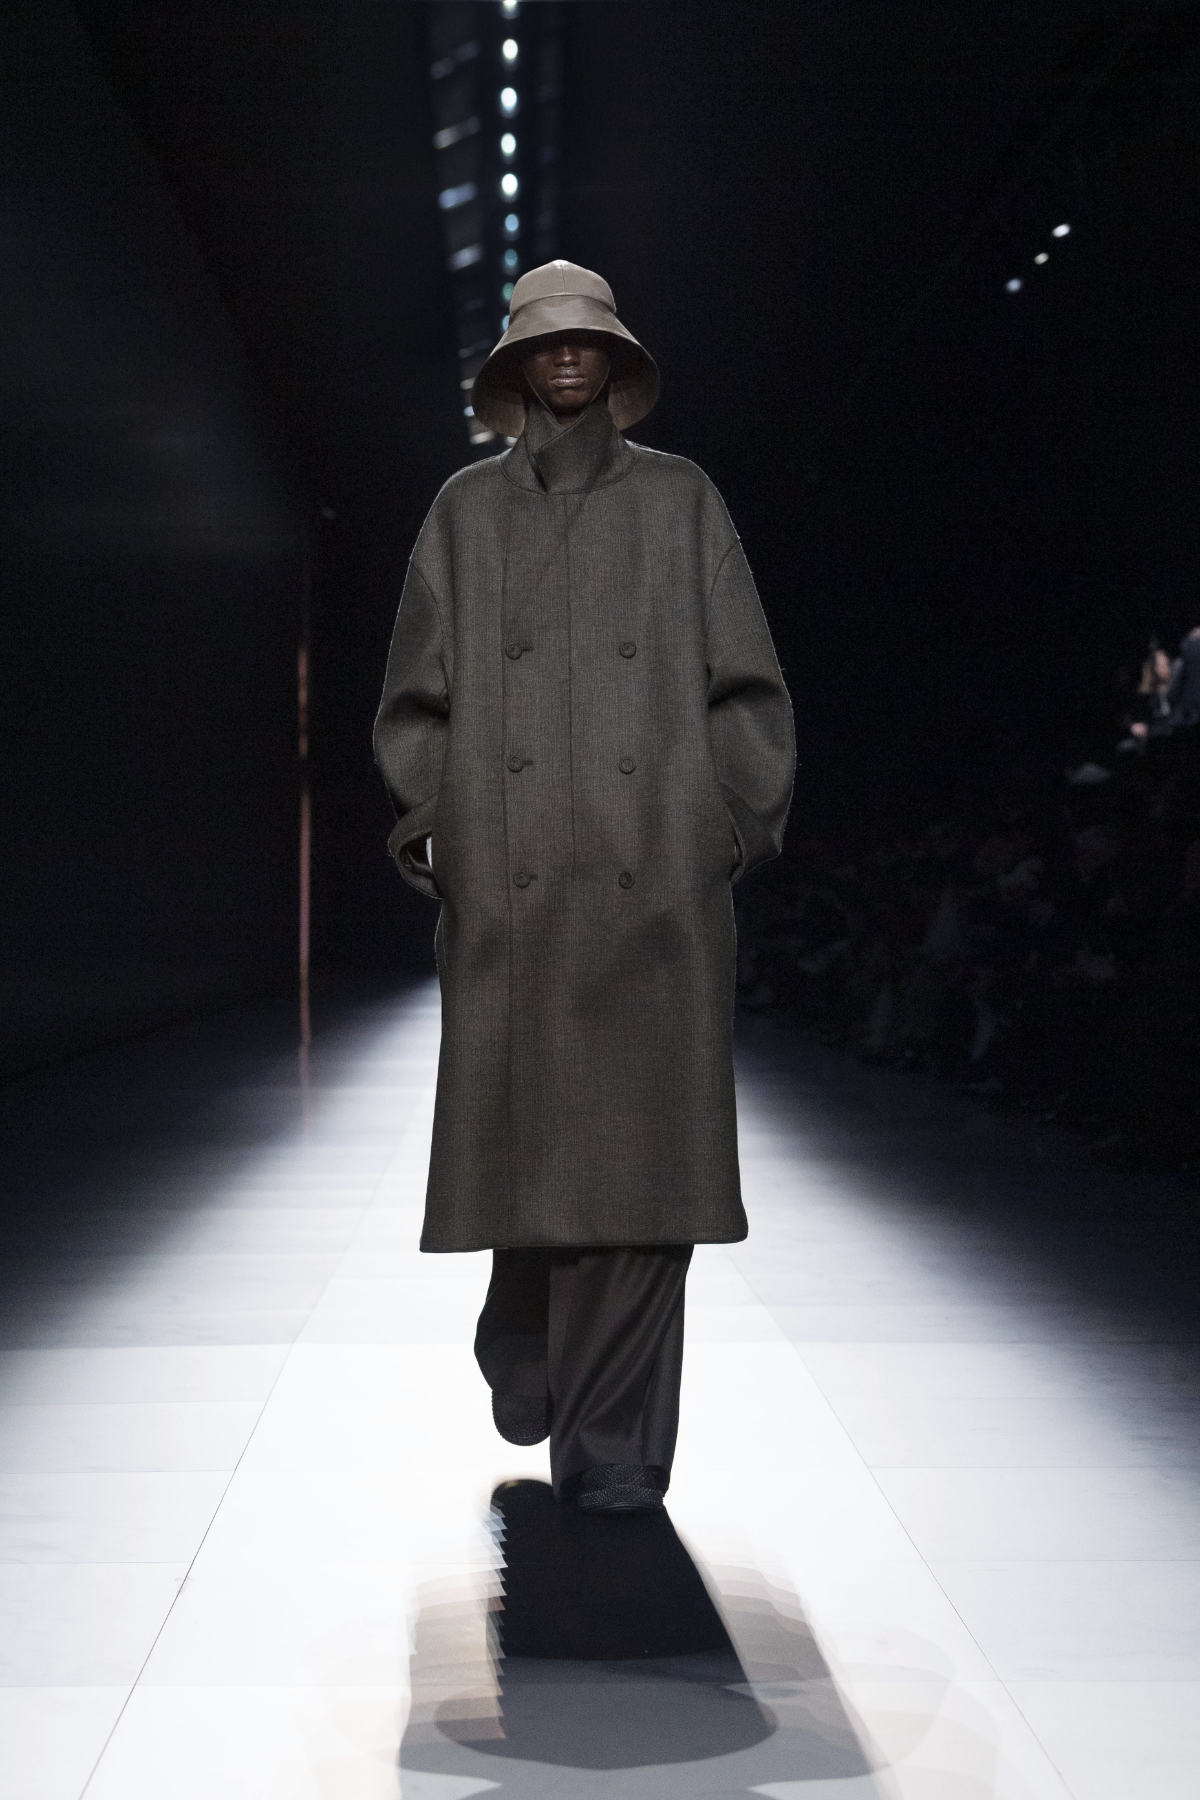 Dior Presents Its New Winter 2023-2024 Men’s Collection